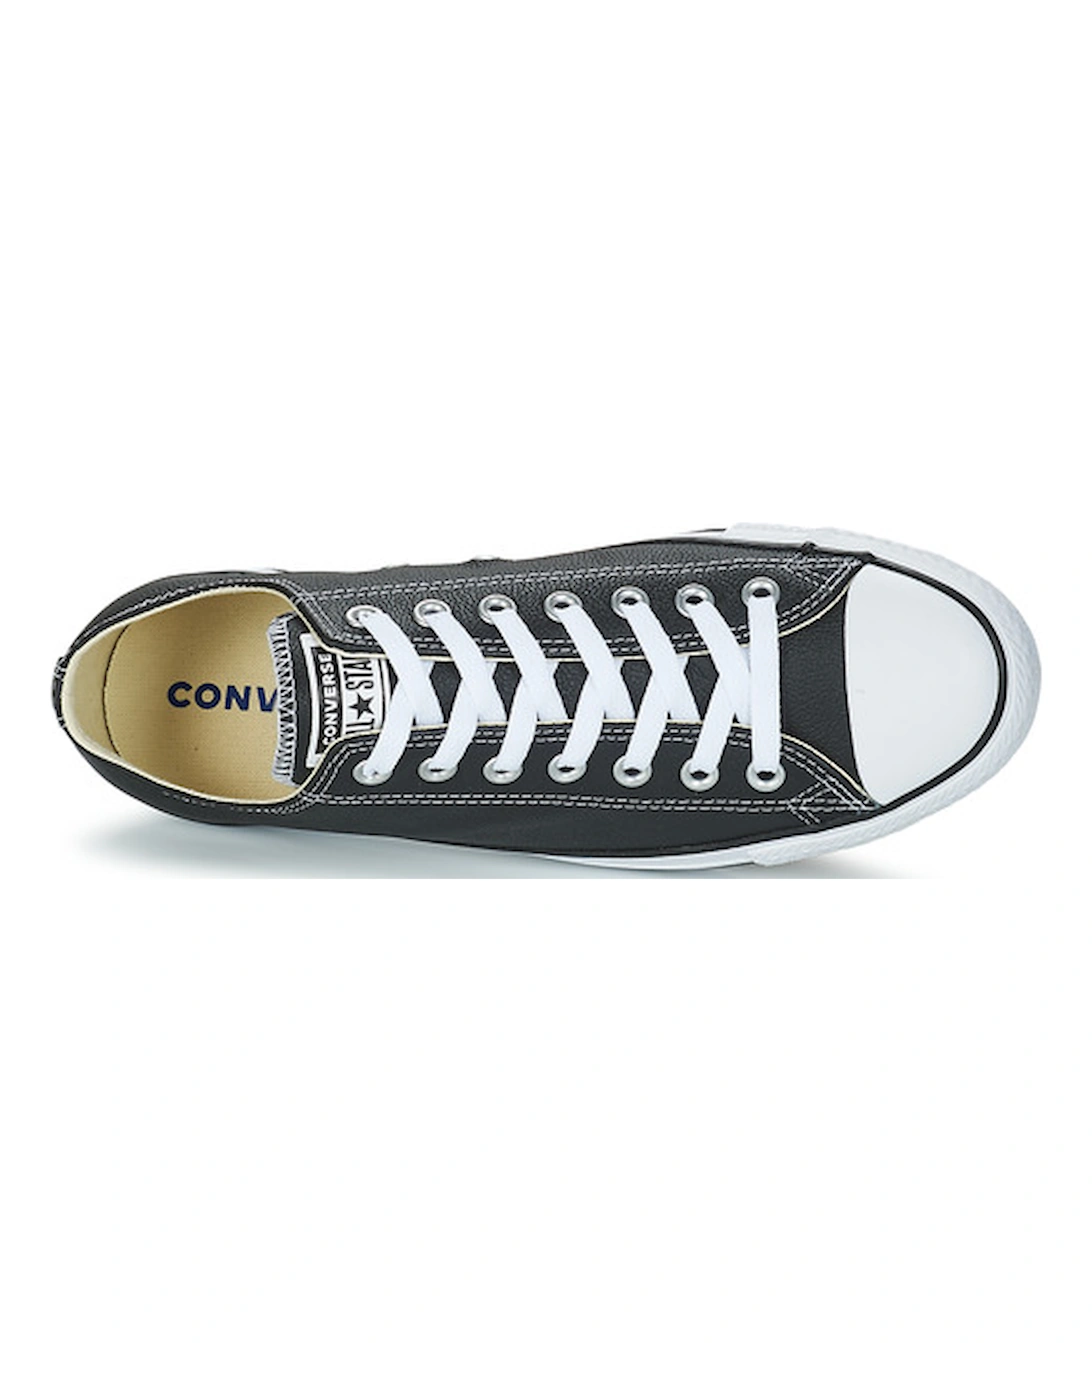 CHUCK TAYLOR CORE LEATHER OX